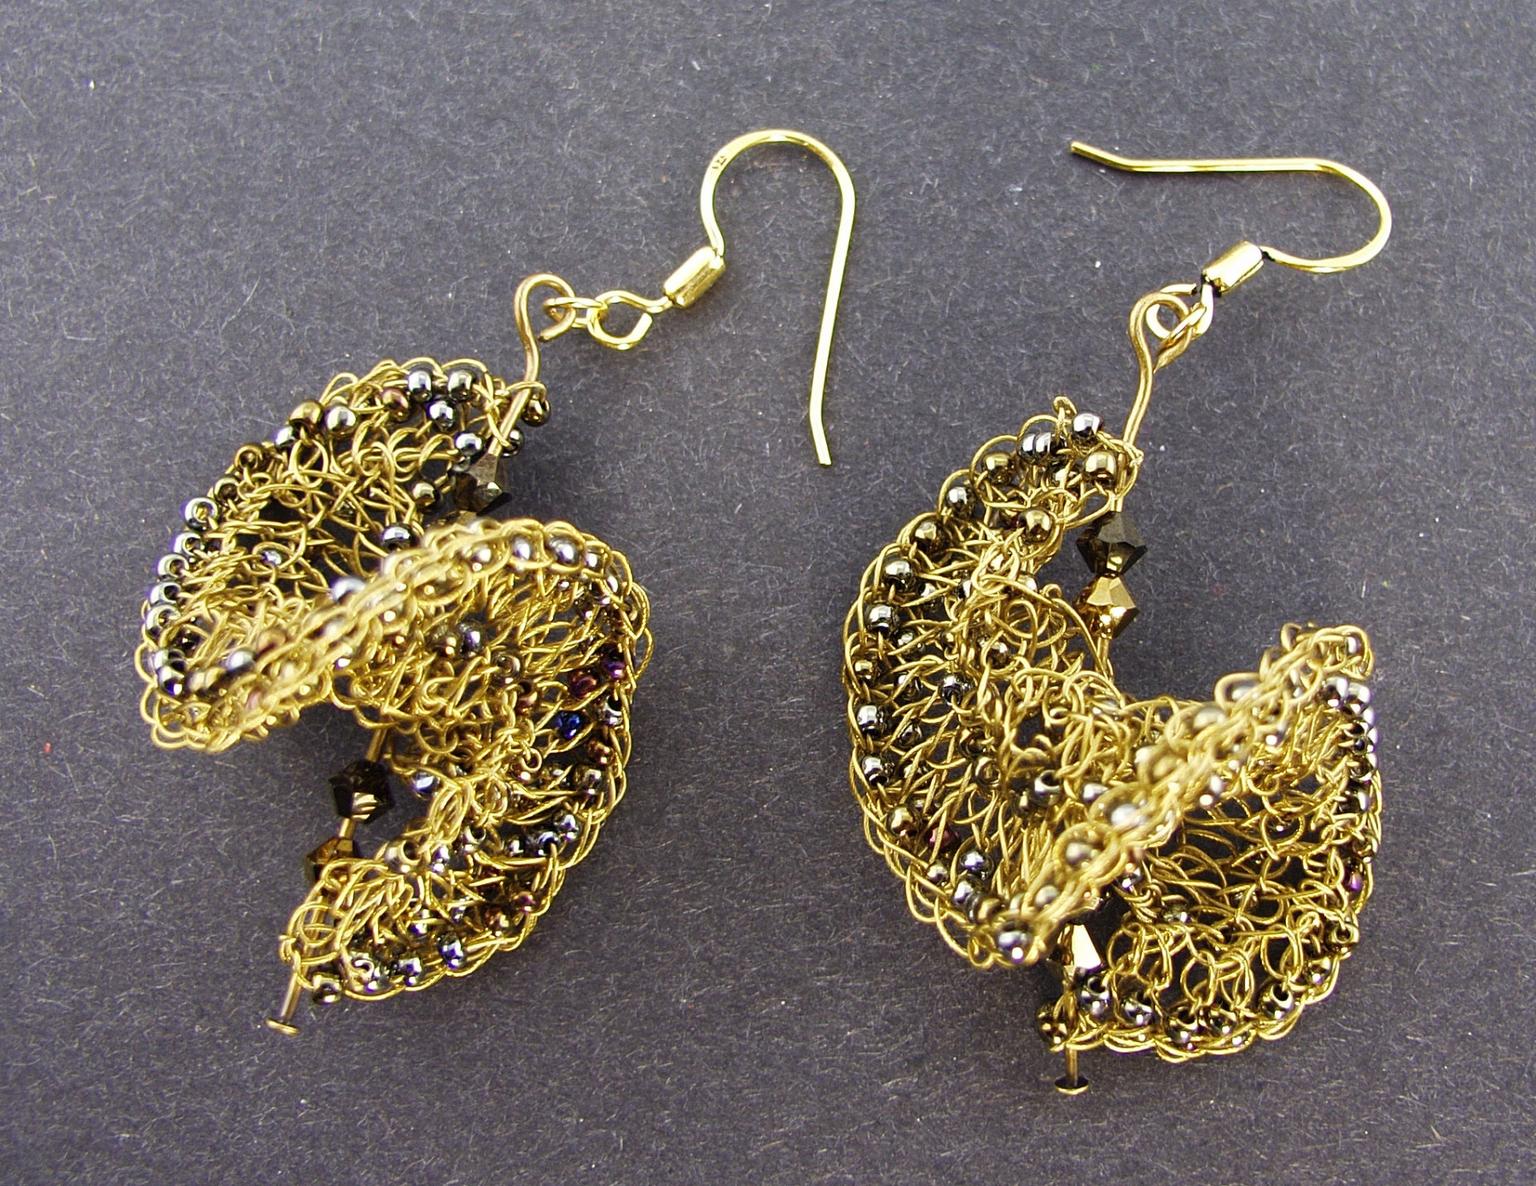 Image for entry 'Exponential earrings'